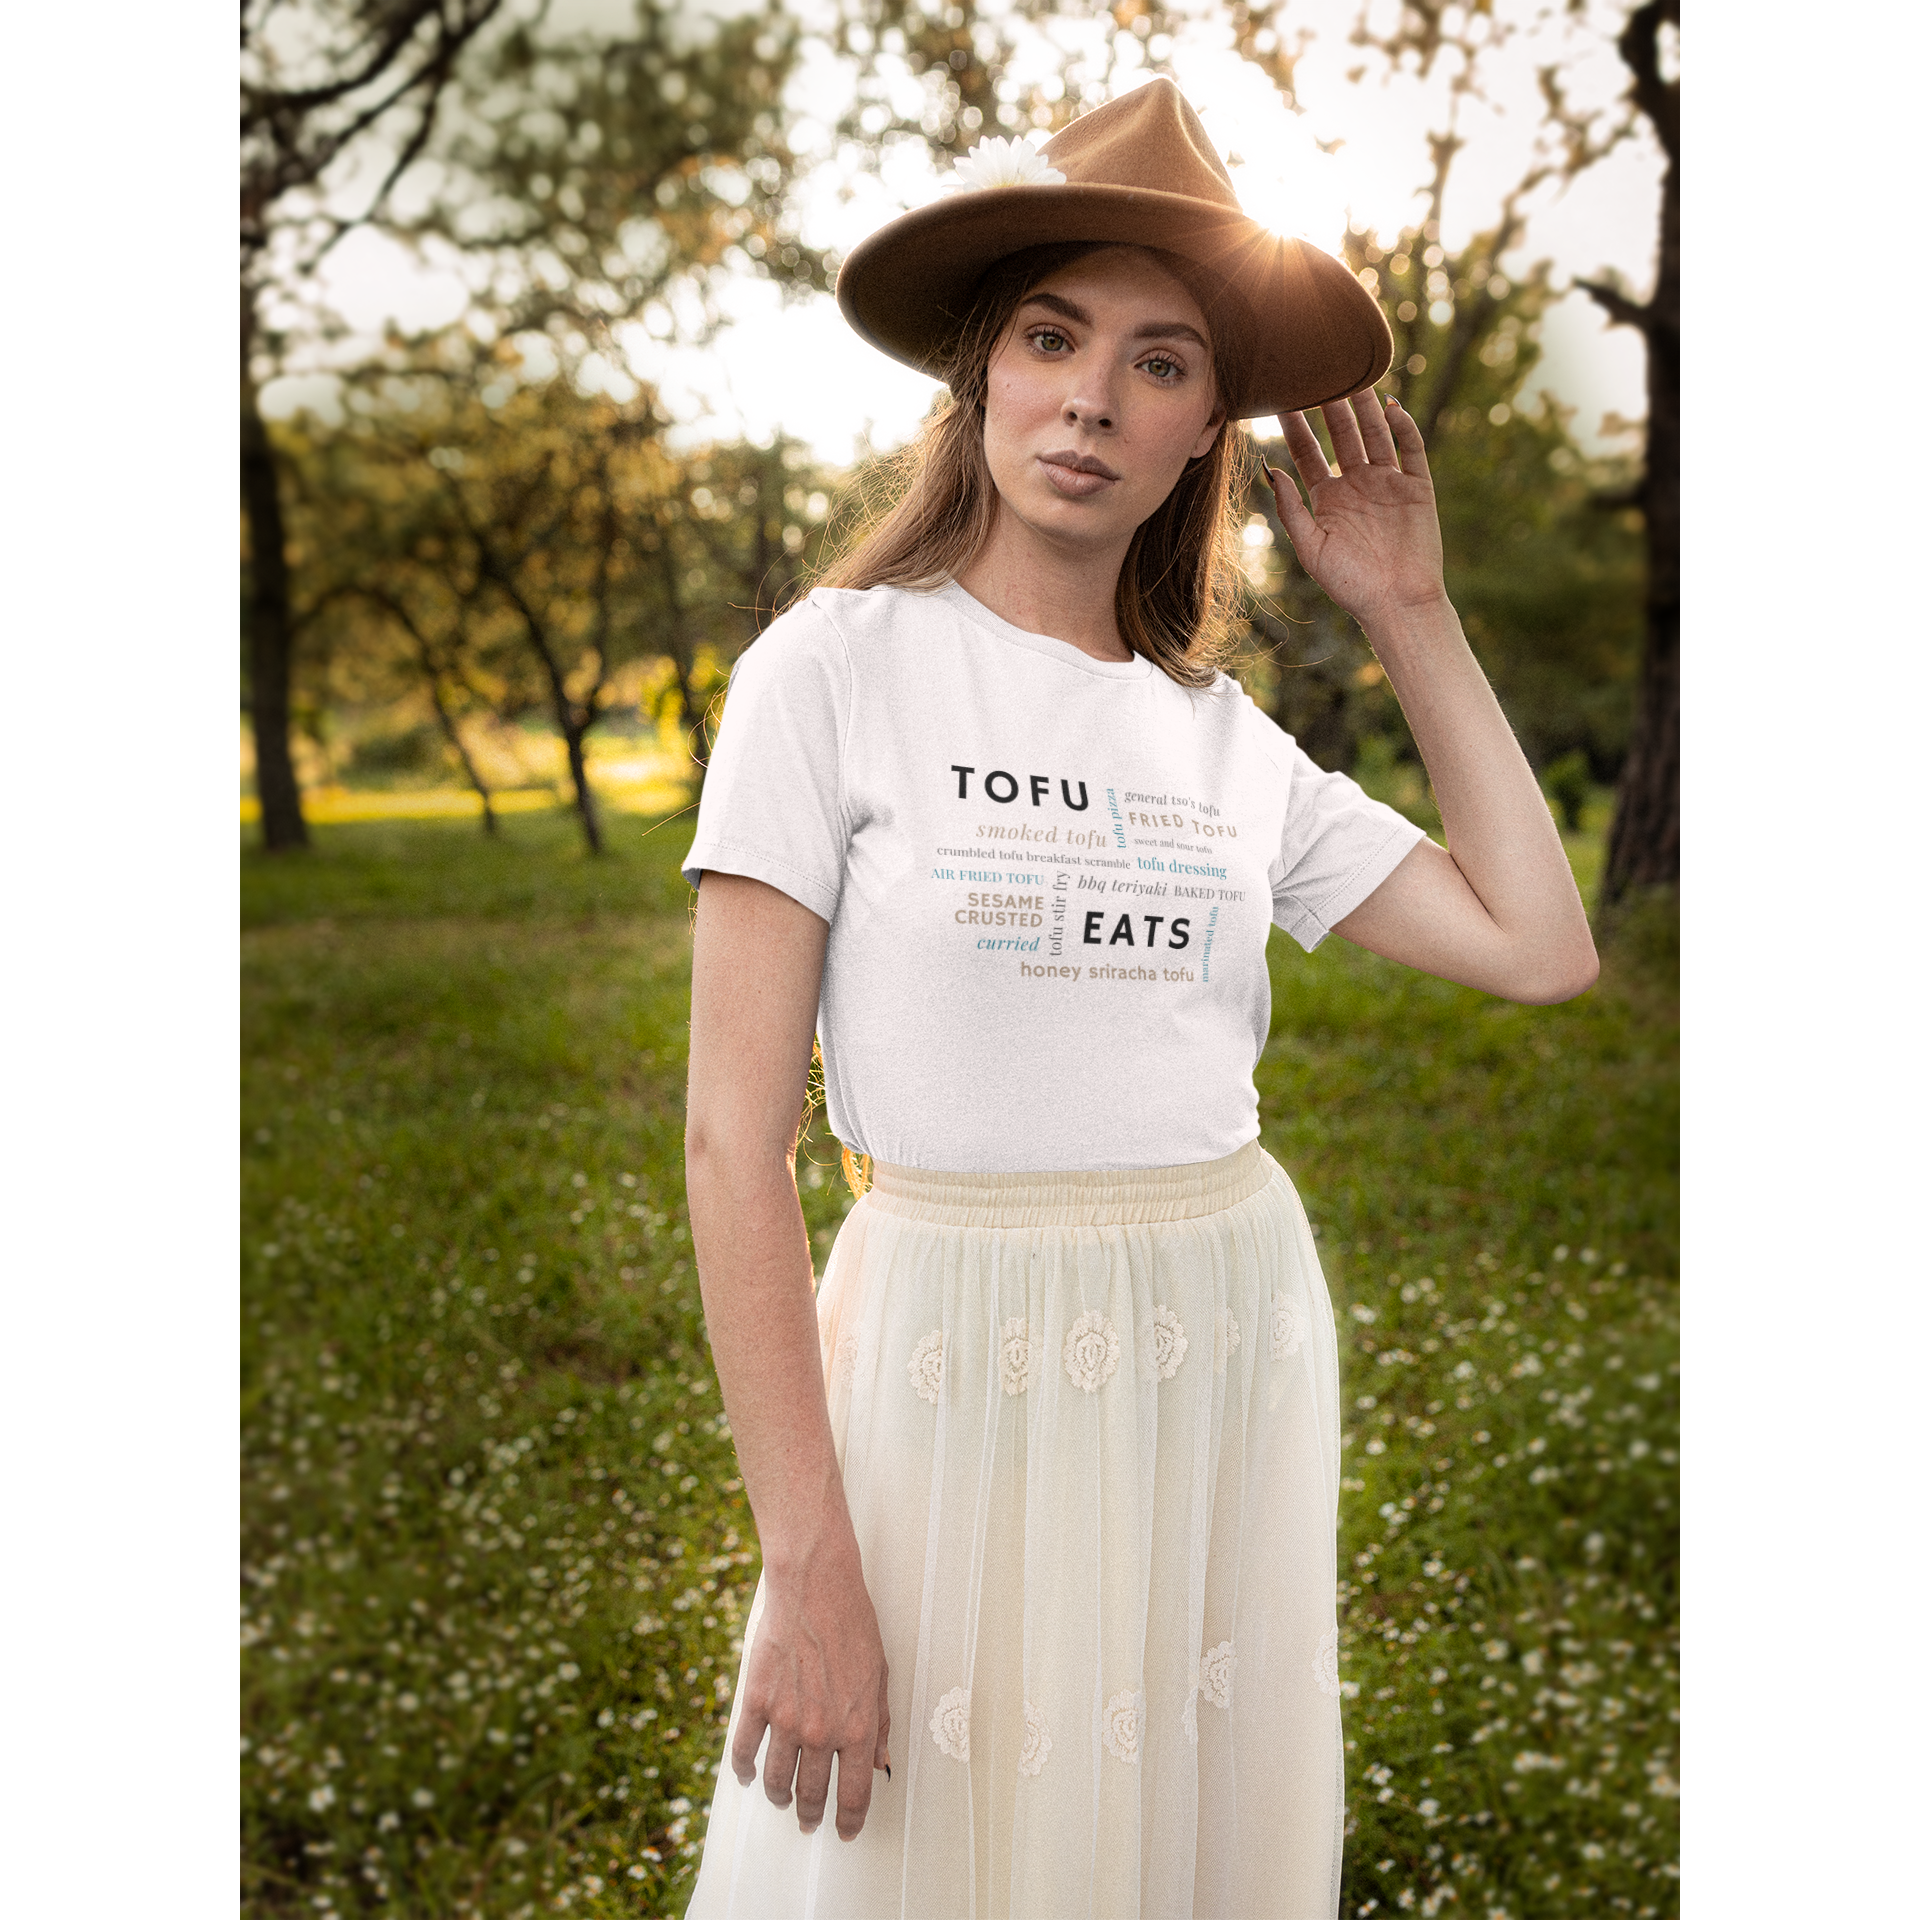 tofu shirt design with a tofu eats word salad design on a white premium vegan t shirt worn by a woman outside with a hat and skirt